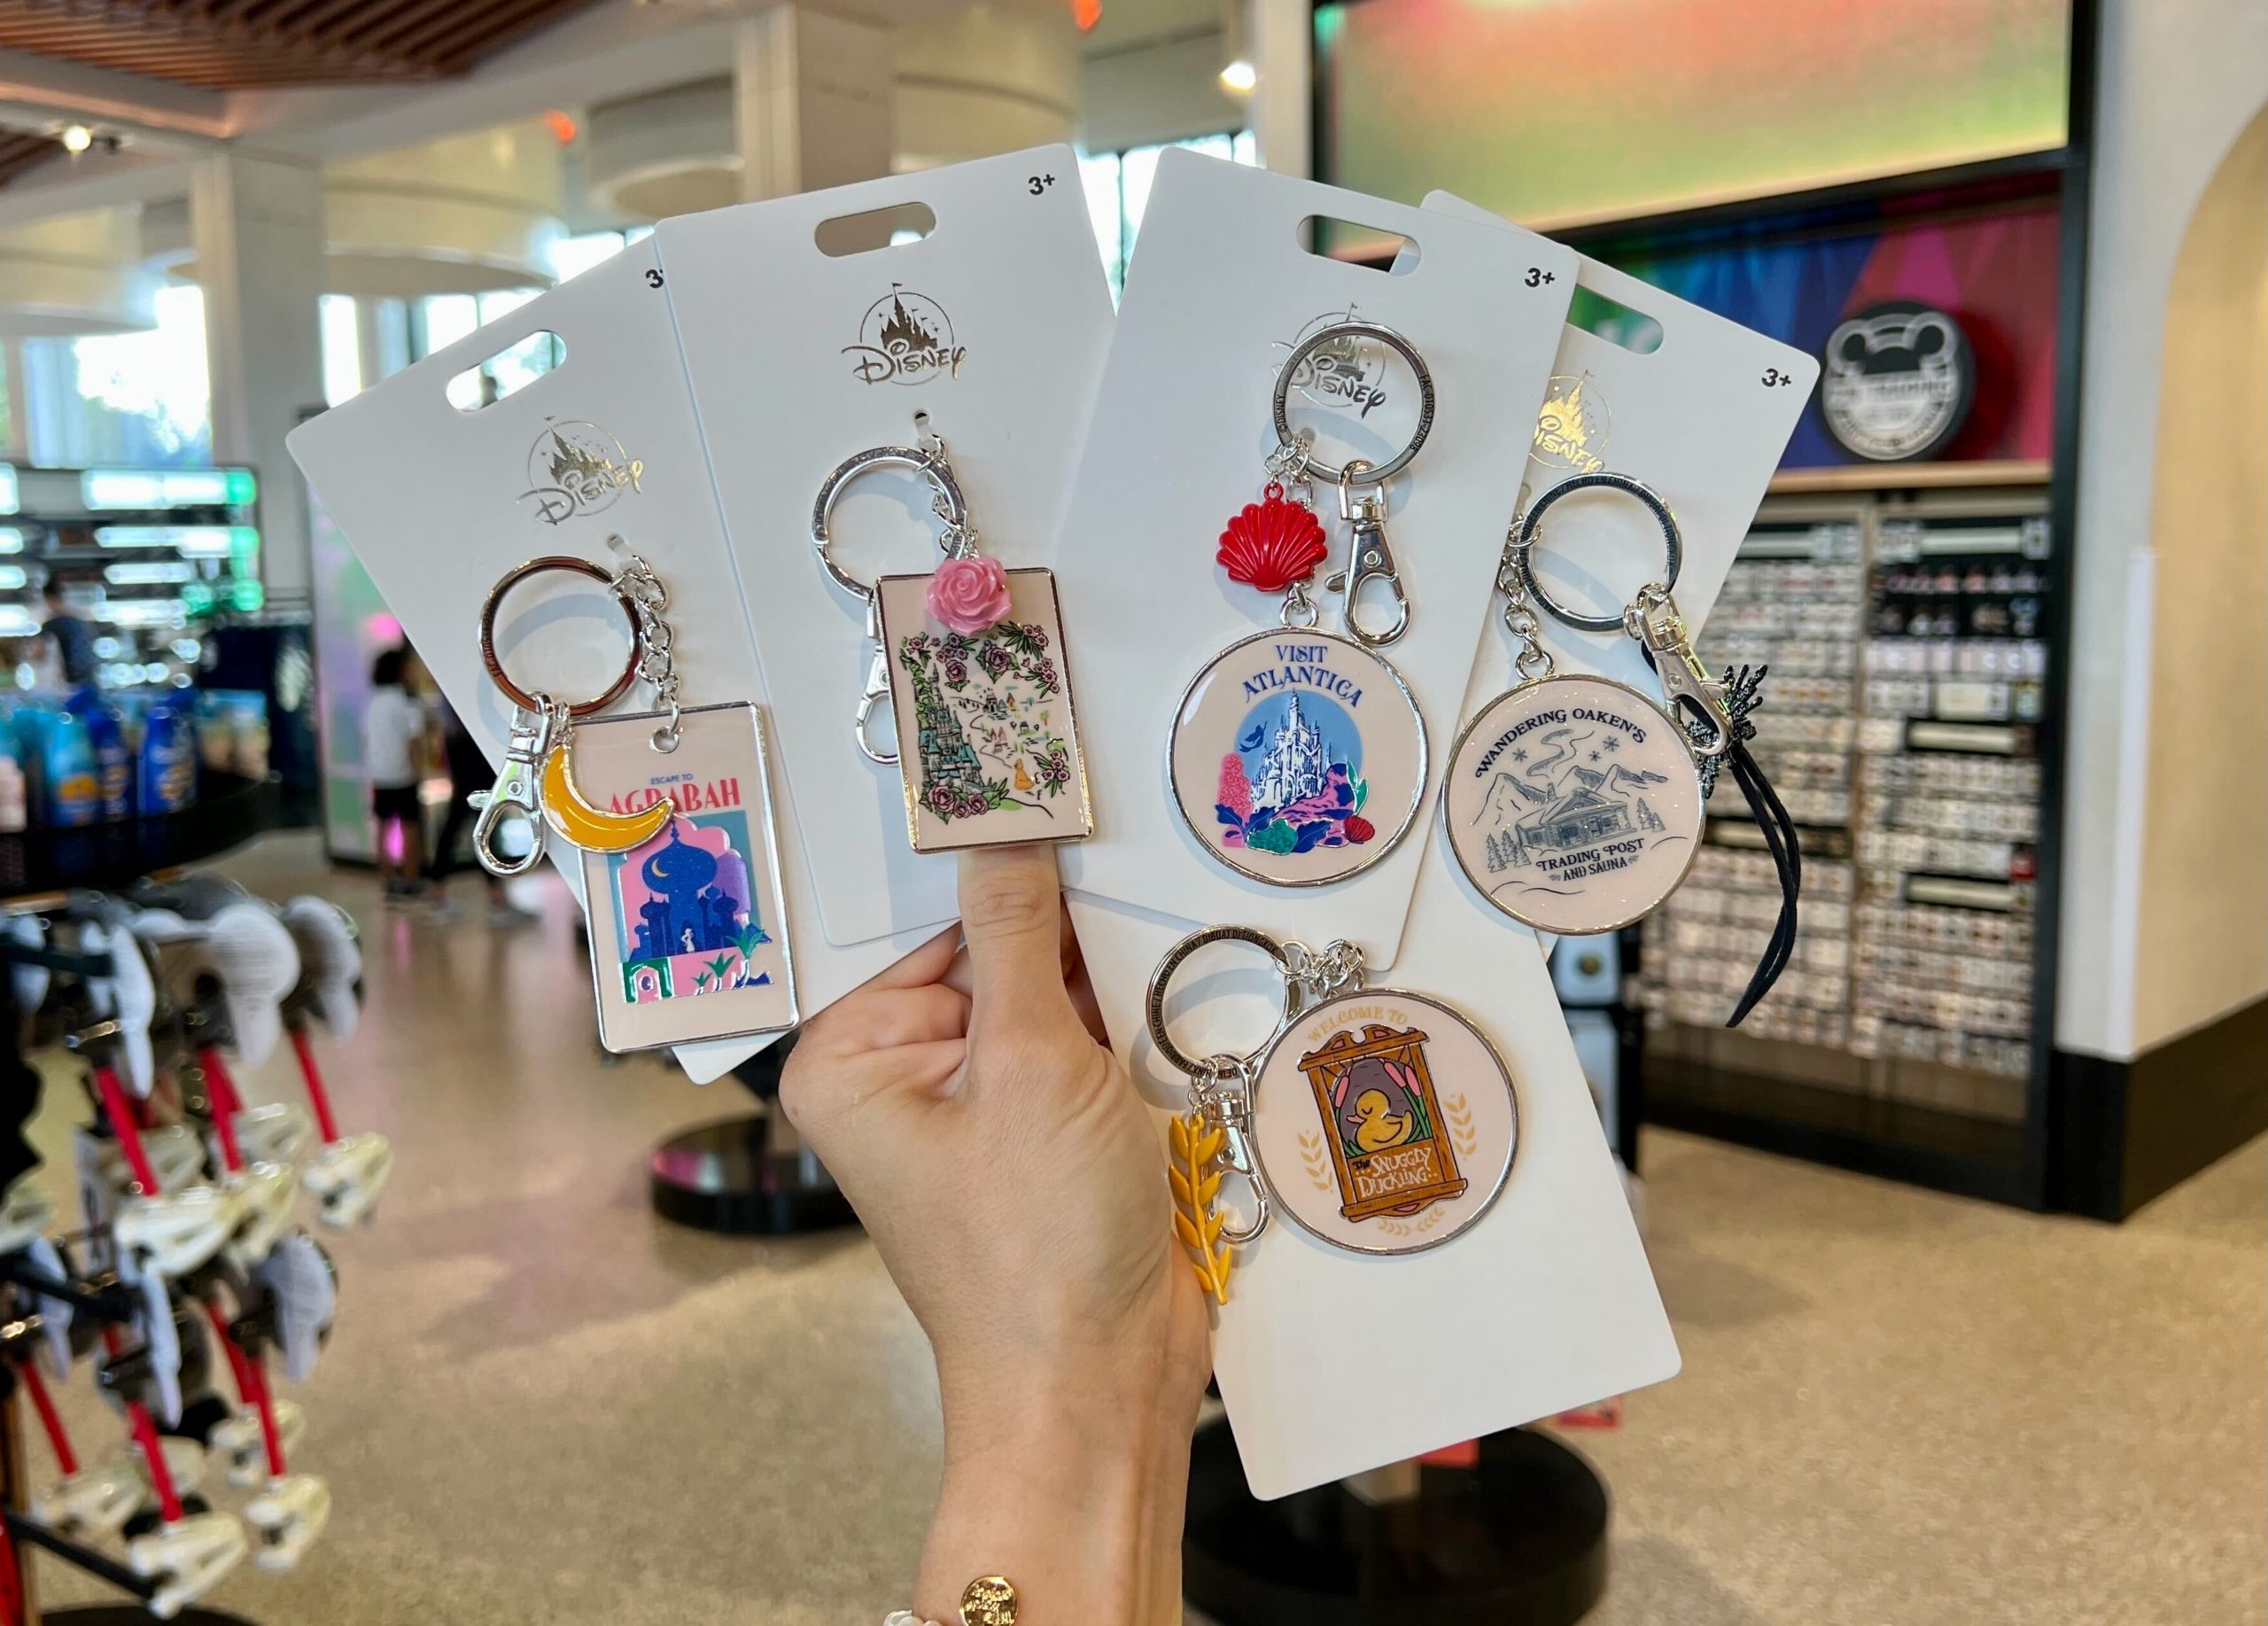 Princess City Keychains at Creations Shop in Disney Springs